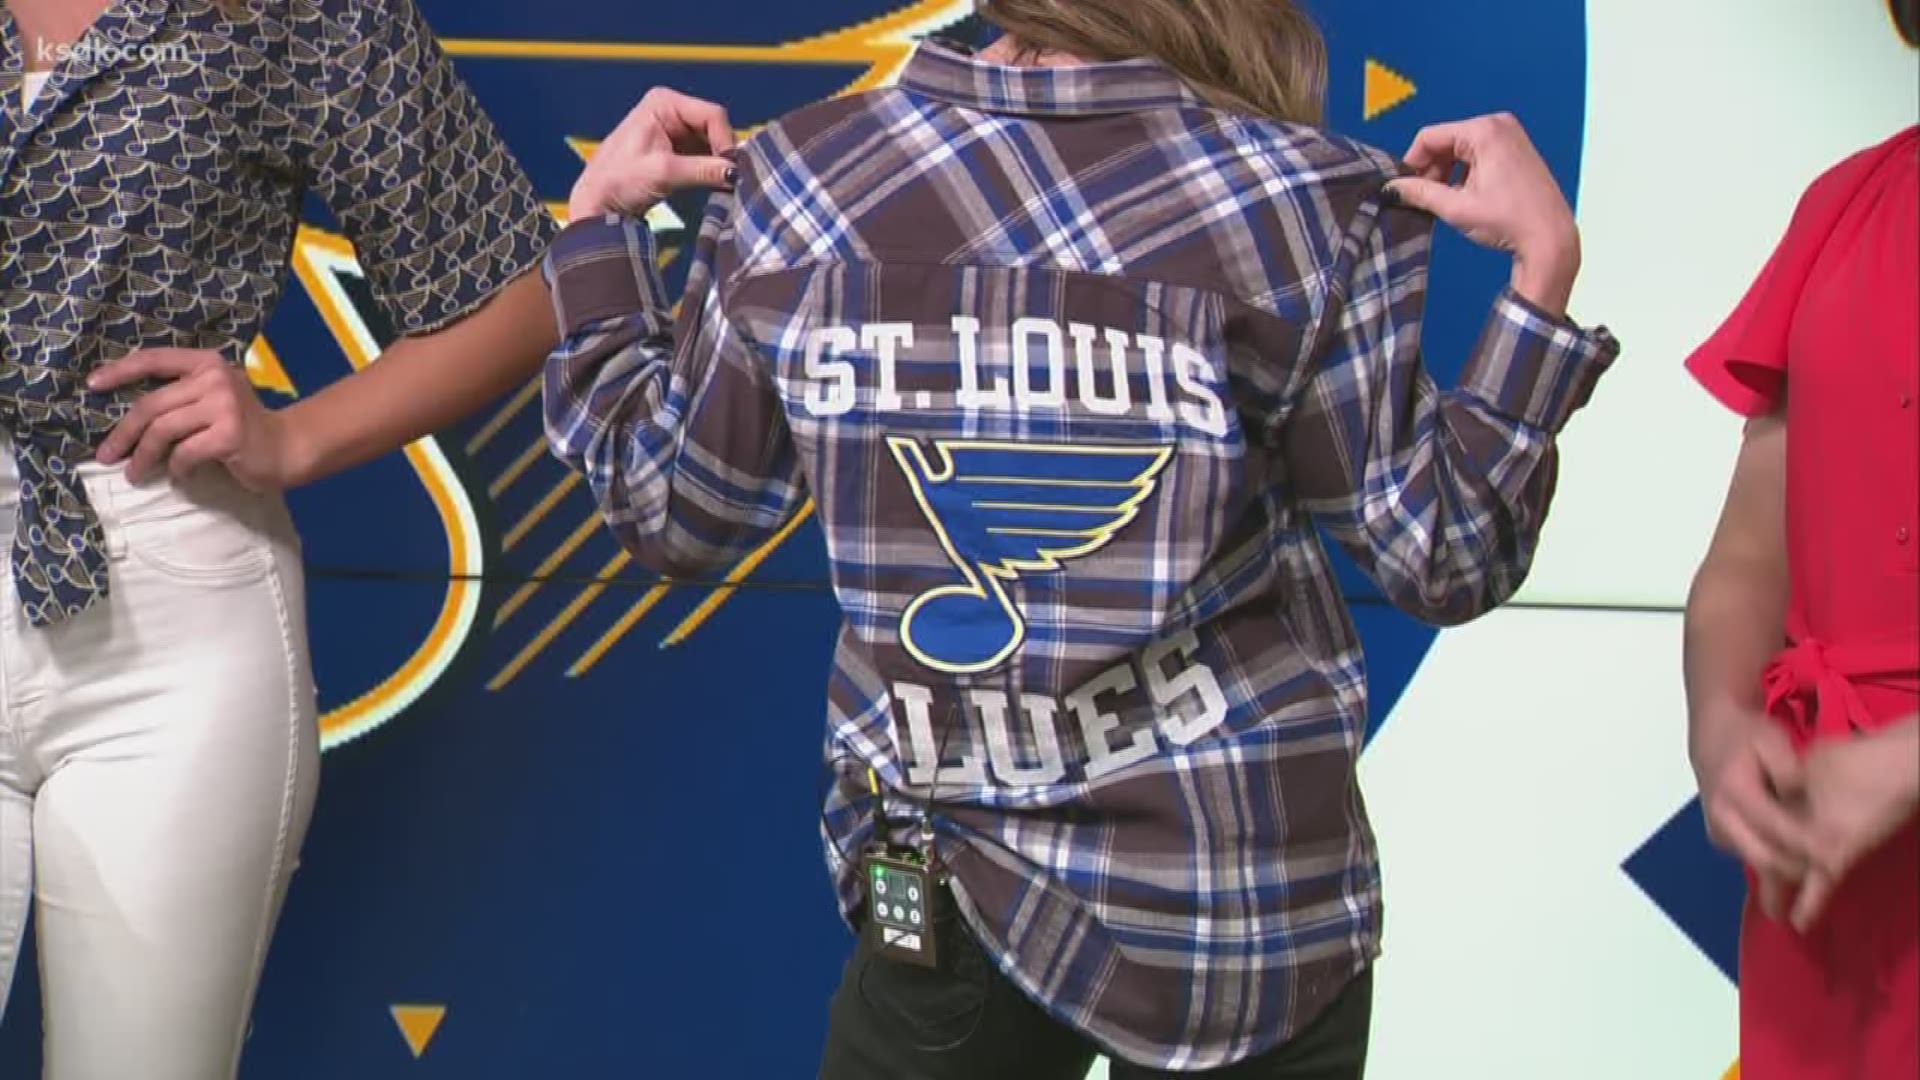 The full collection is available at the Blues Team Store at Enterprise Center. Shop select pieces at STLAuthentics.com.